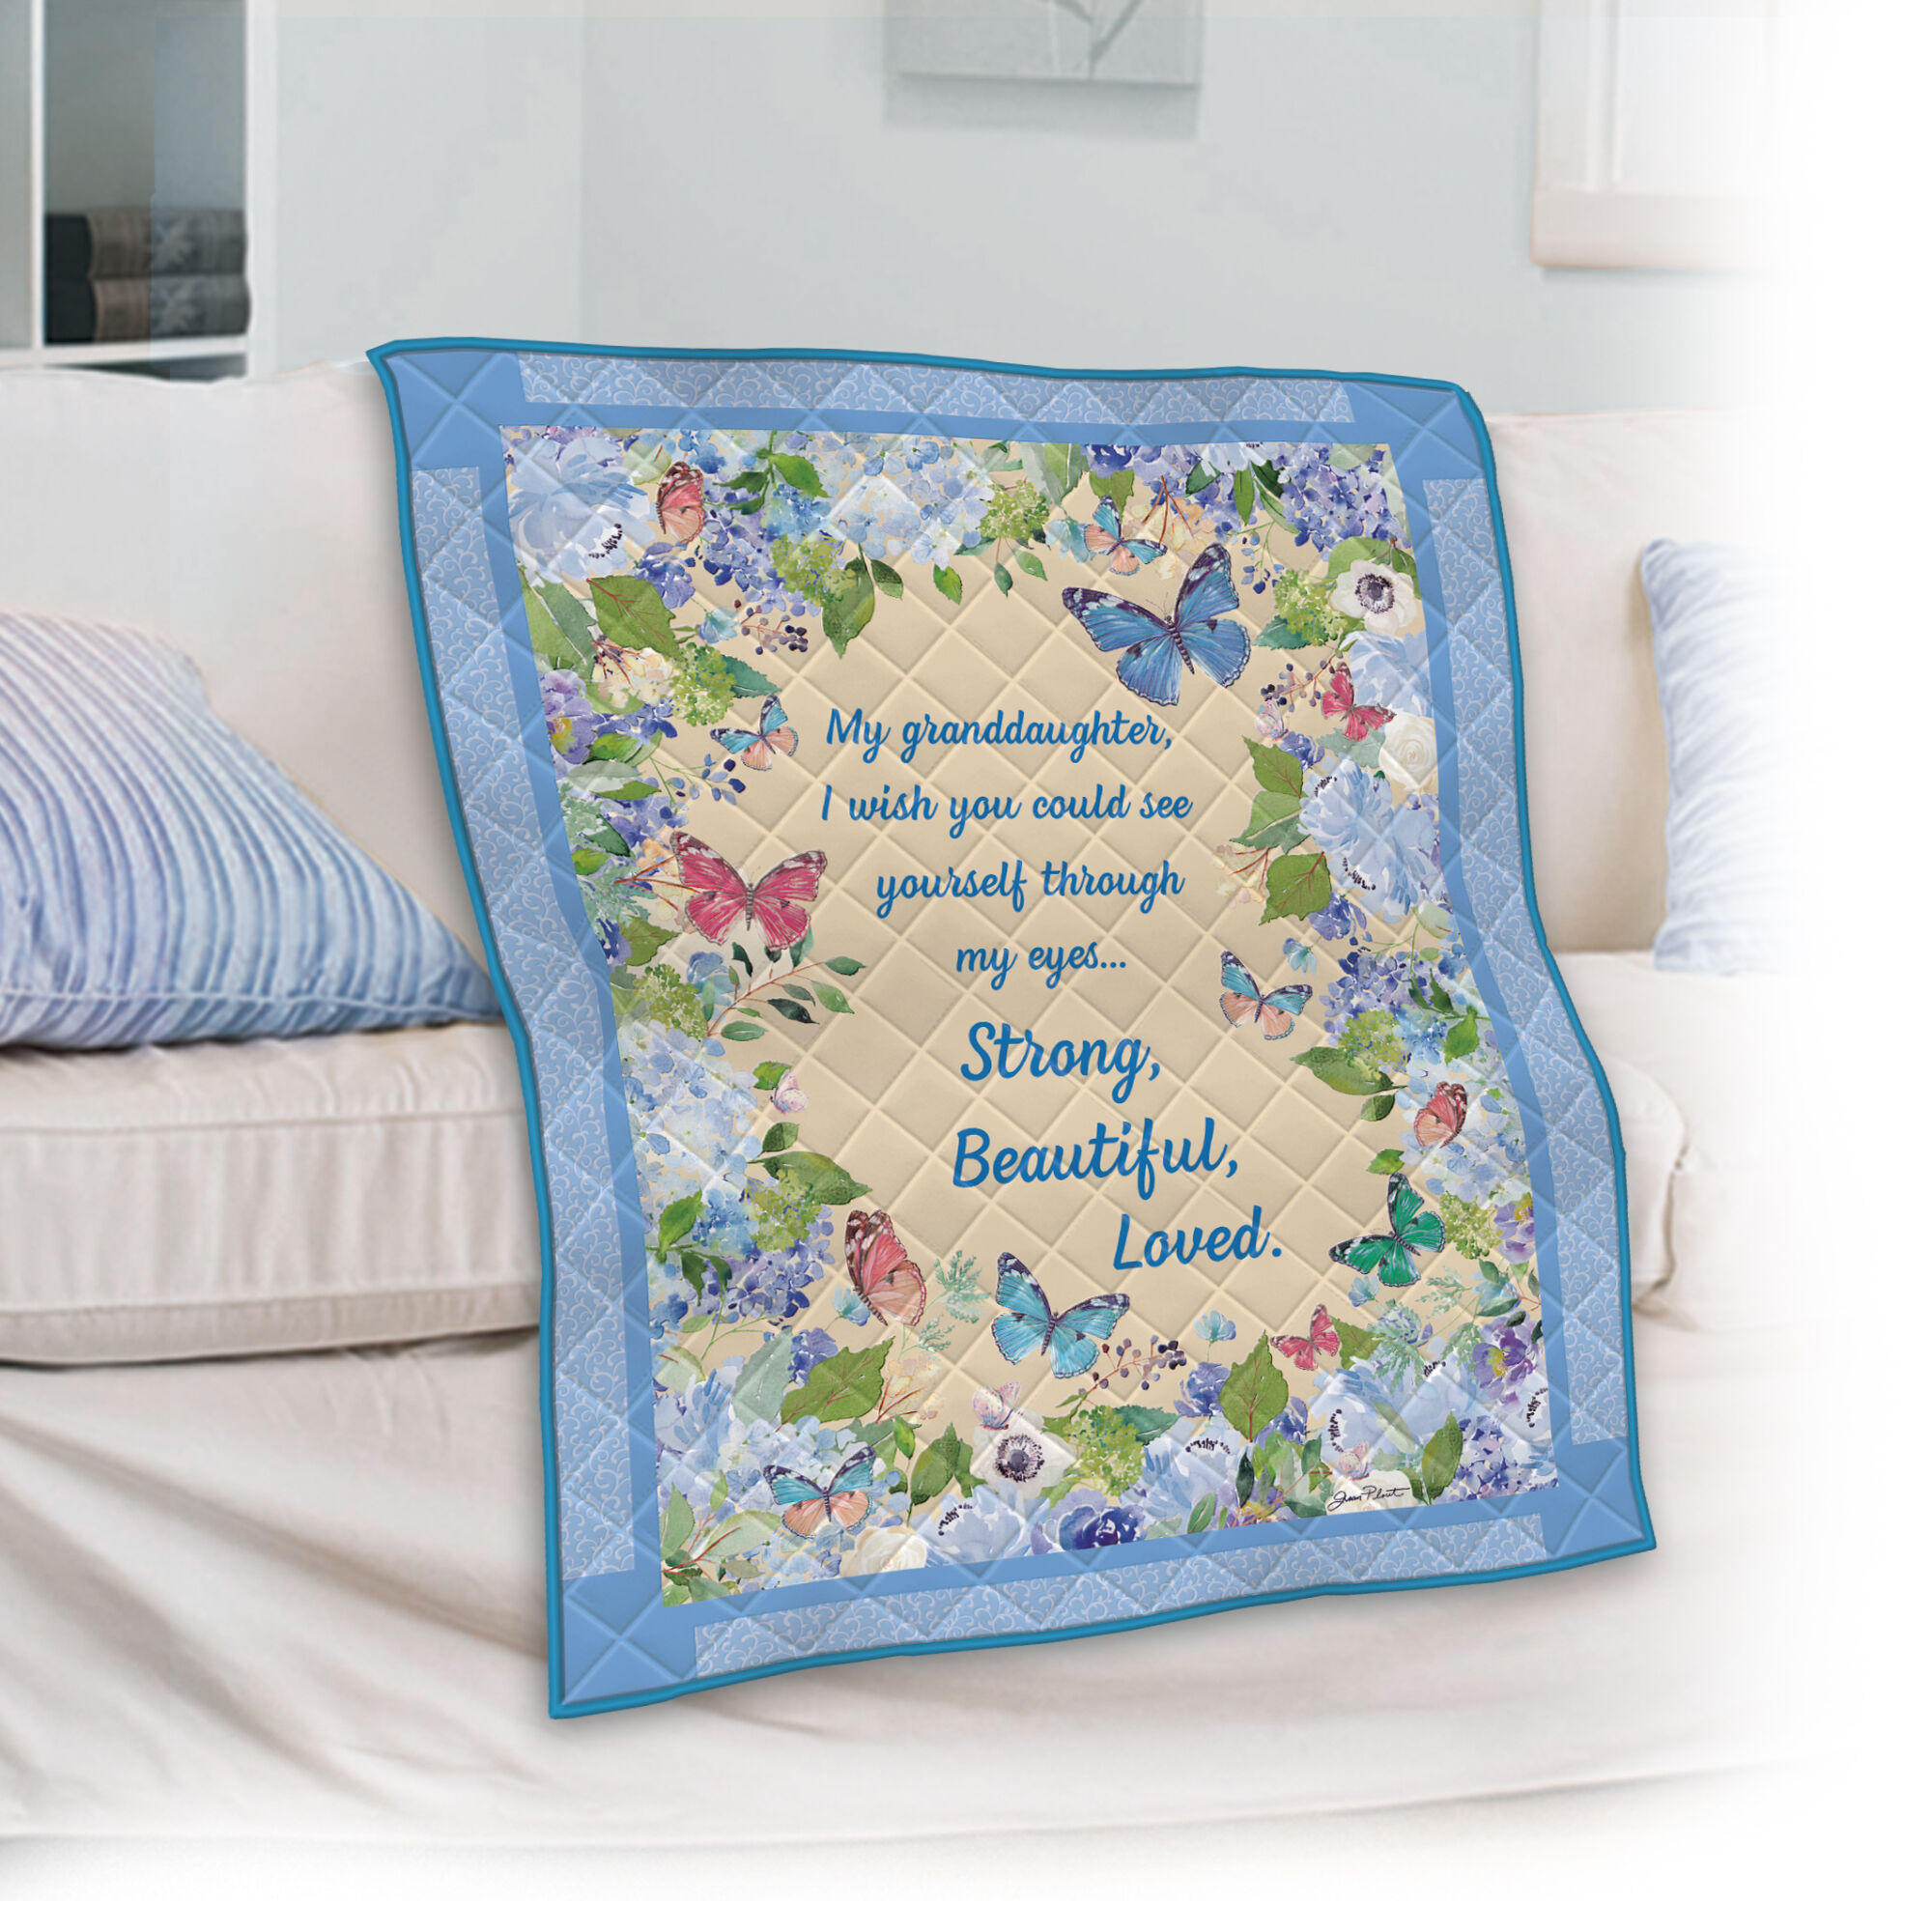 Strong Beautiful Loved Granddaughter Butterfly Quilt 10635 0010 m room